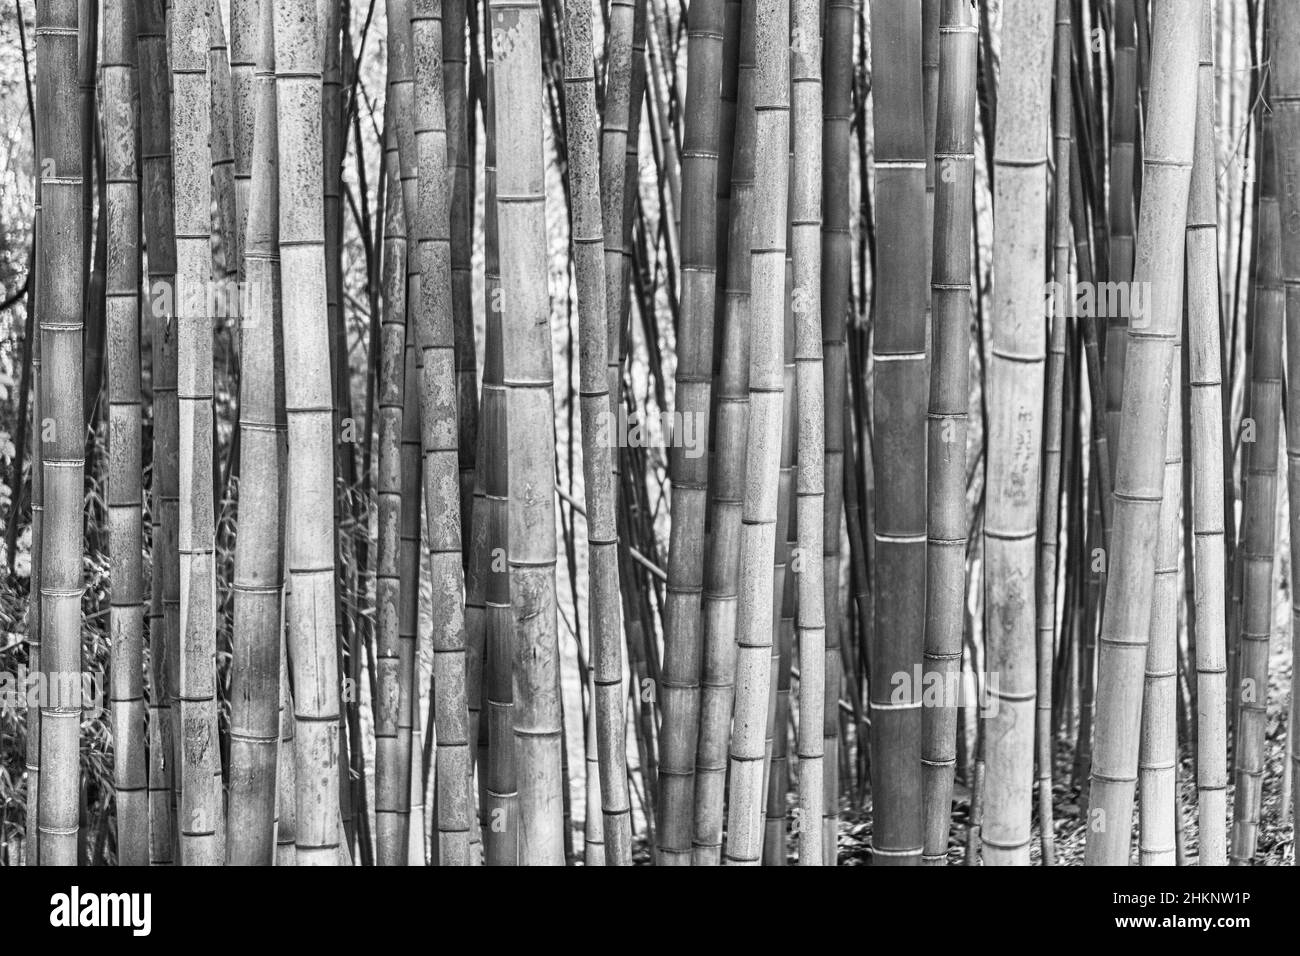 Background with foliage pattern of bamboo trees in a grove or forest Stock Photo